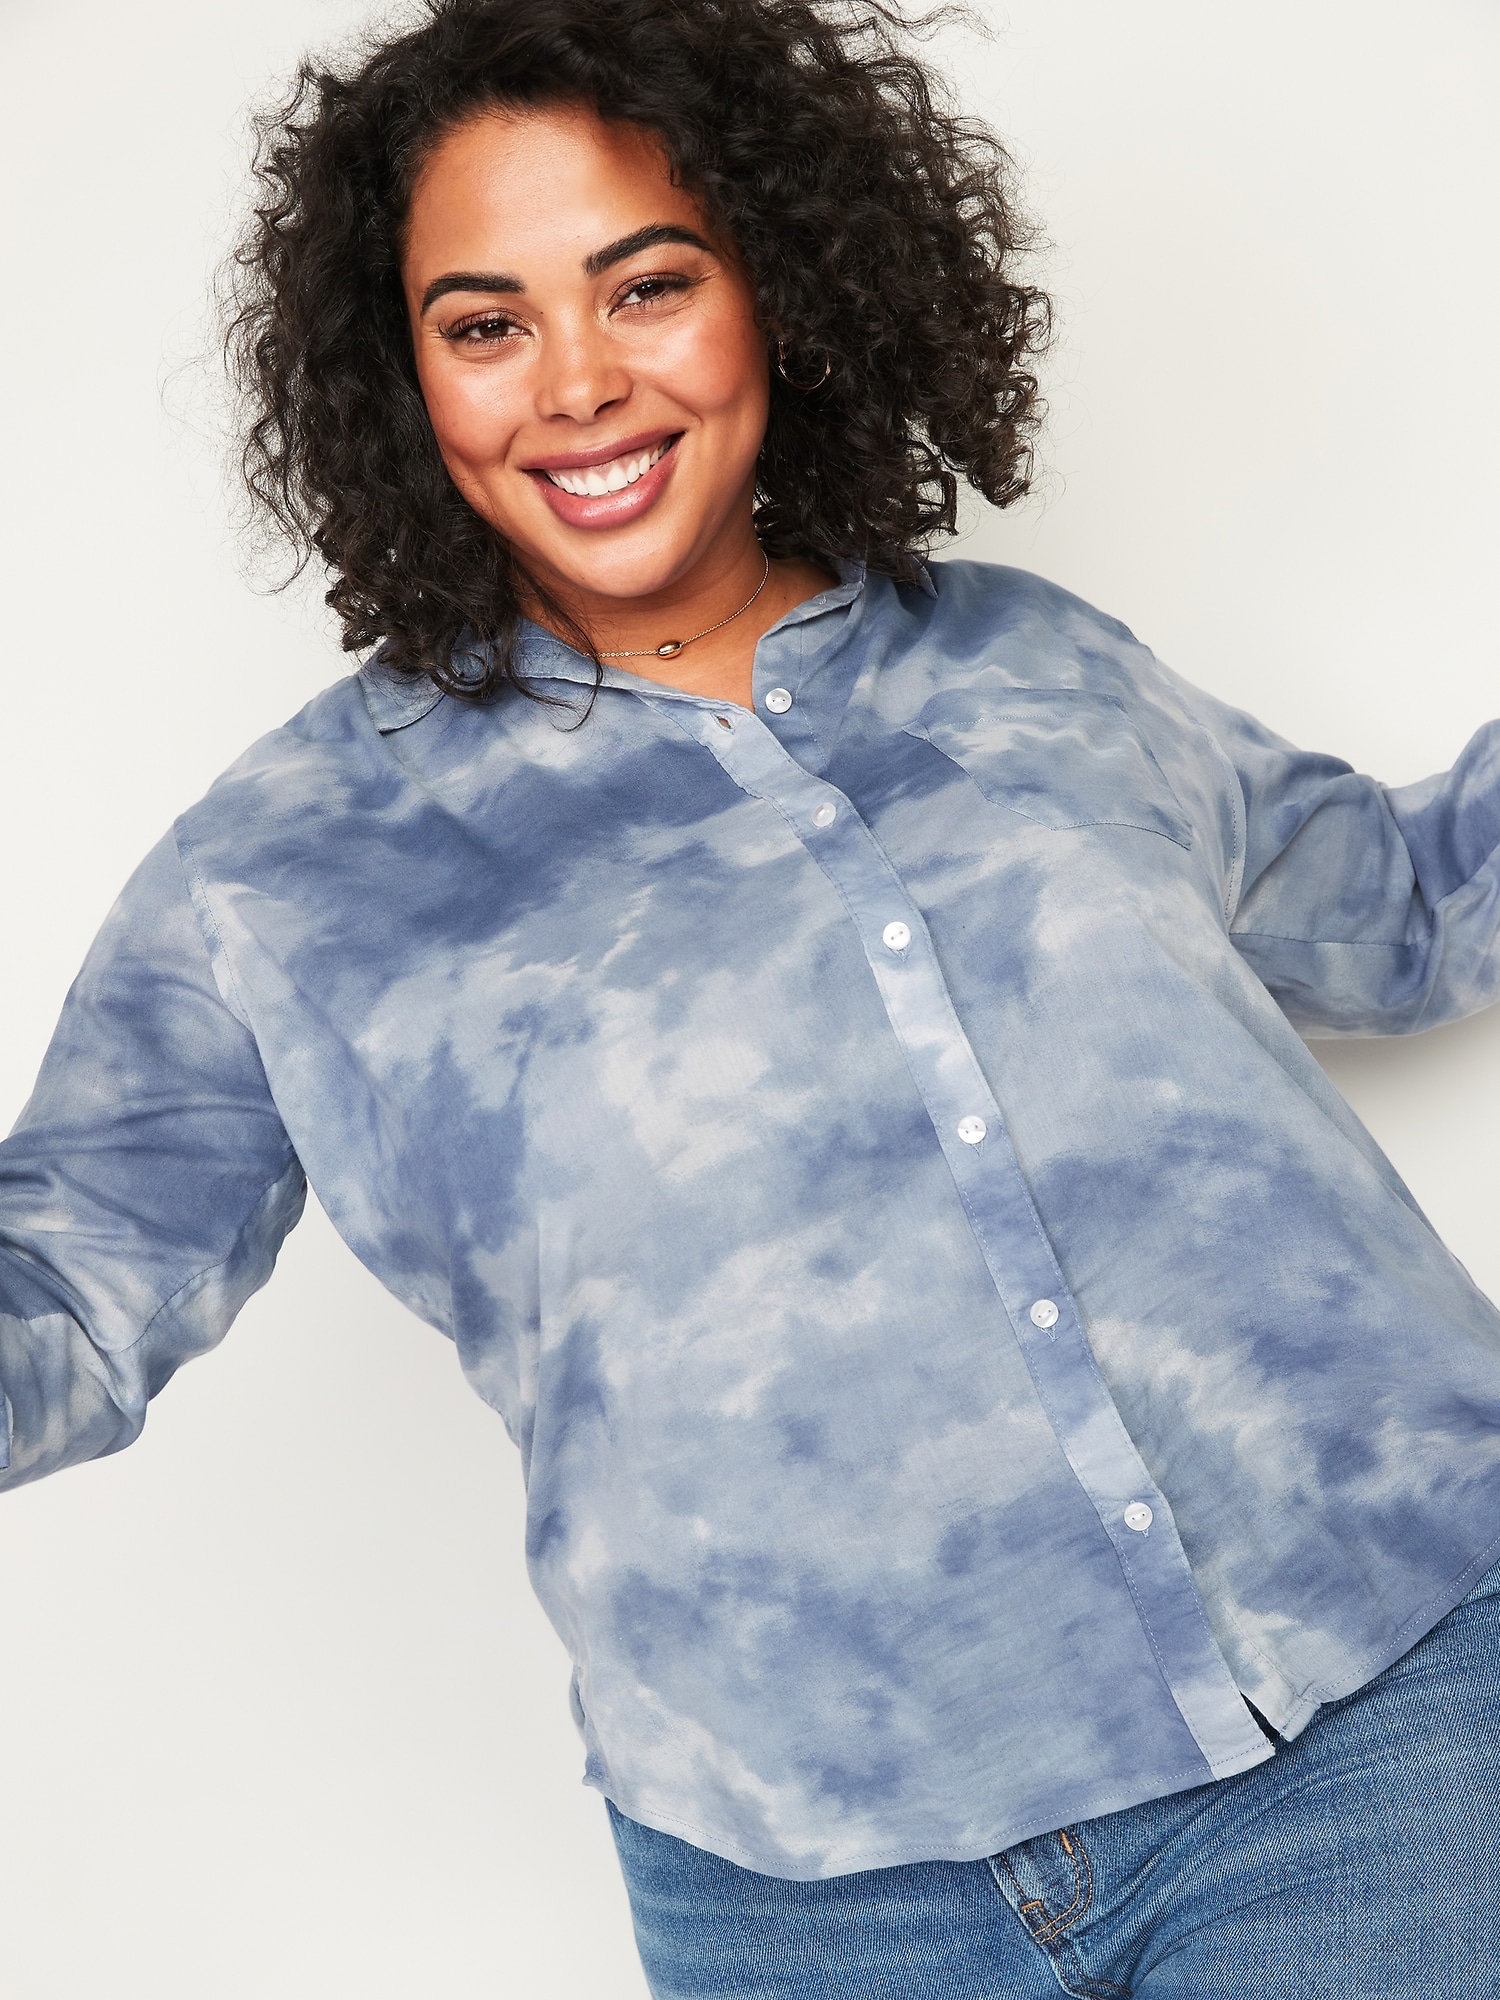 Womens Plus Size Blouses and Shirts